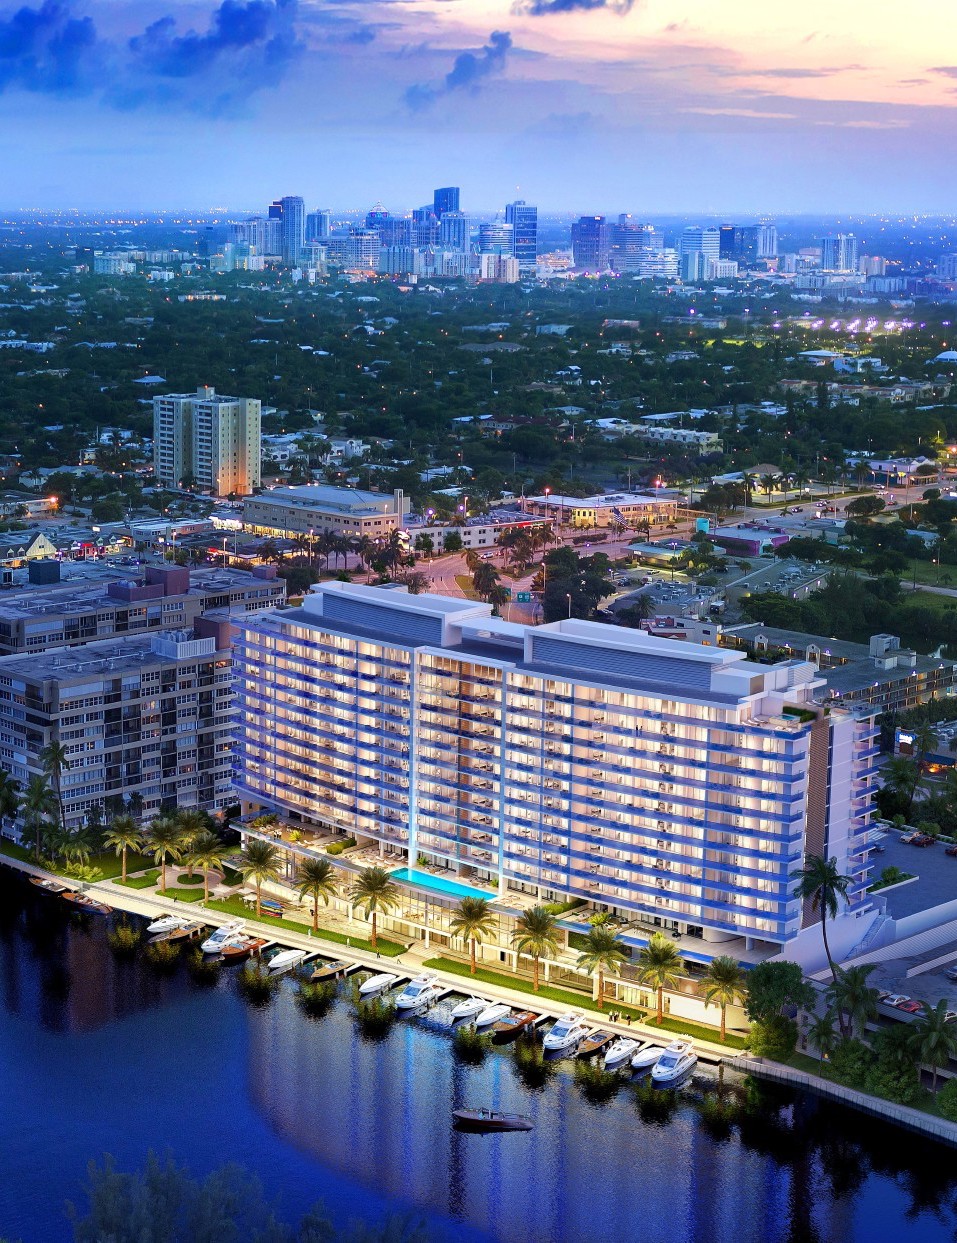 skyview image of Riva Fort Lauderdale